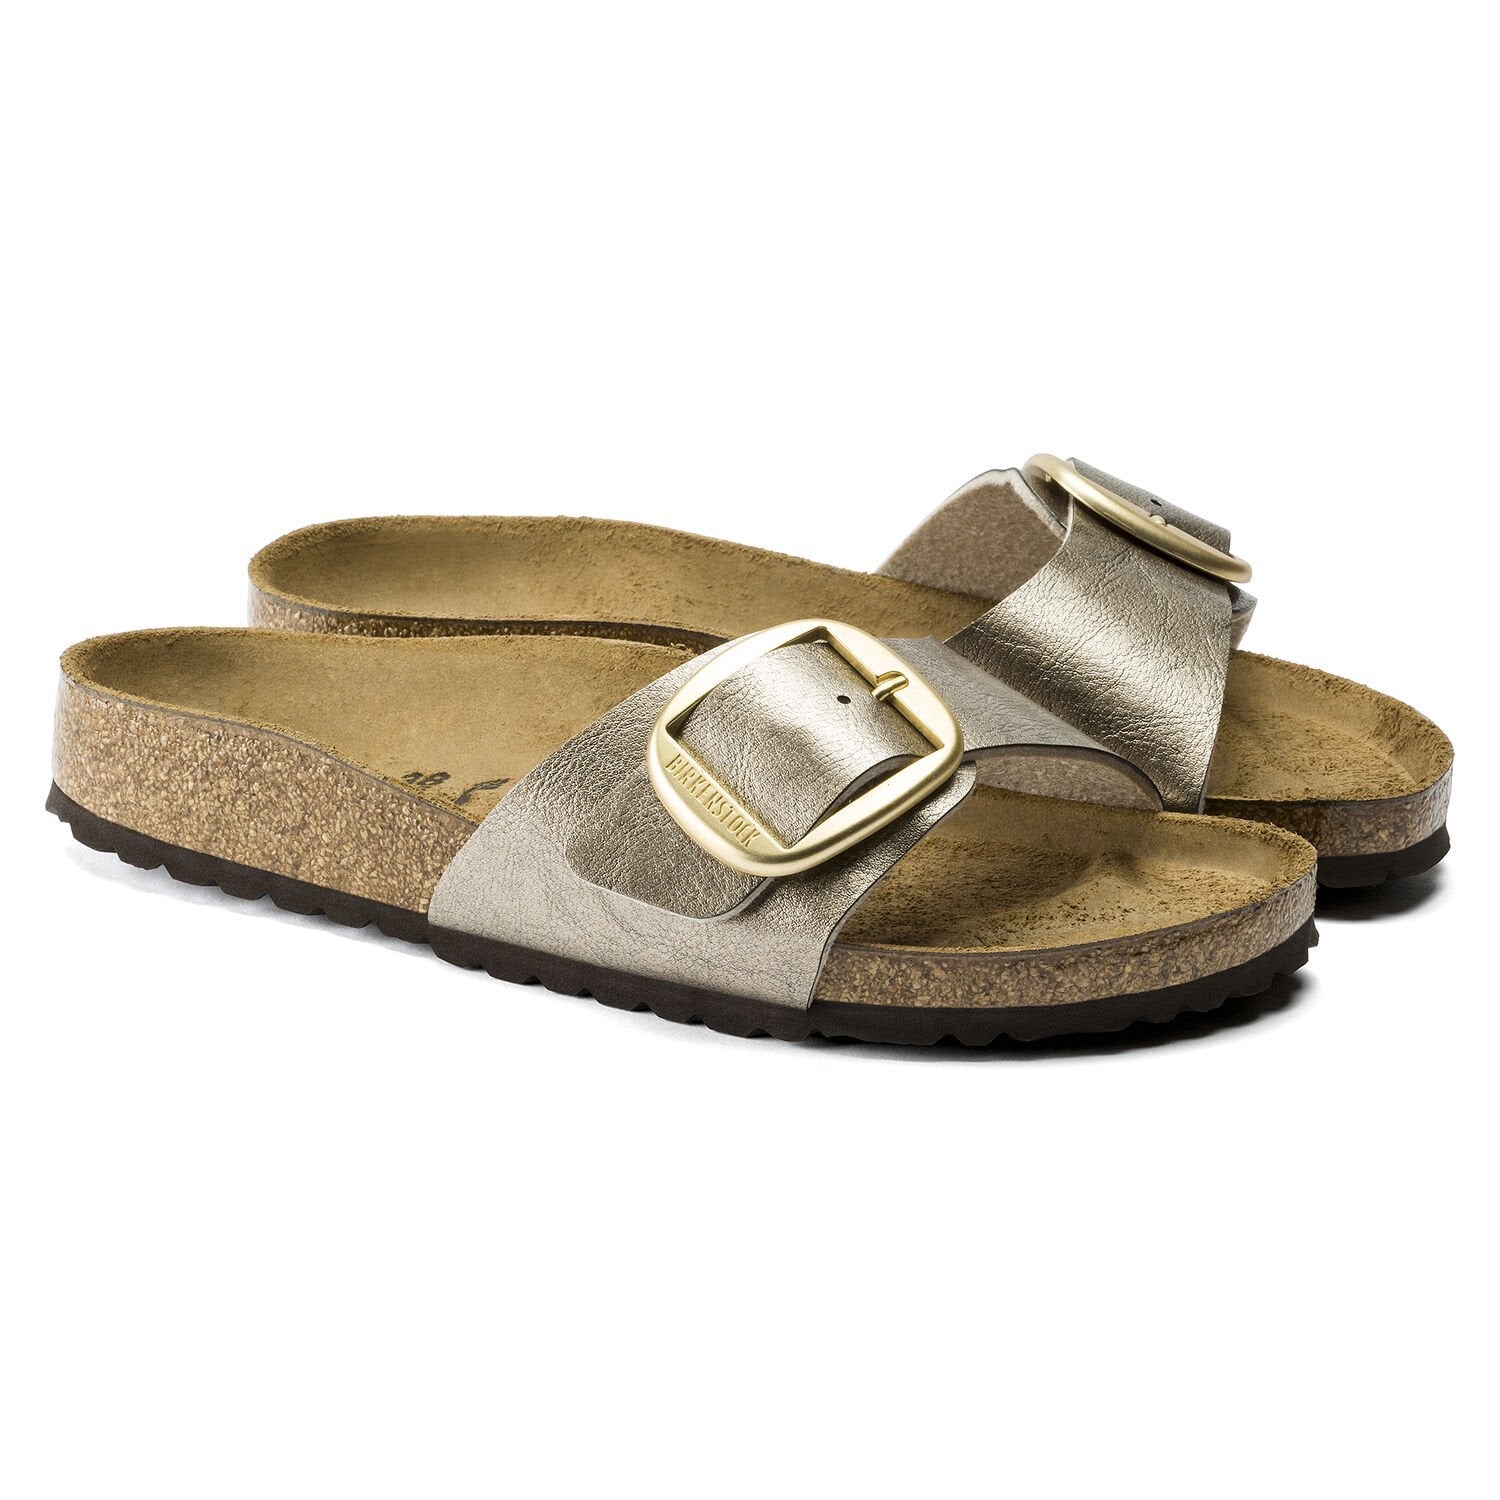 Madrid Big Buckle BIRKENSTOCK 1015279 Pearl White New Collection